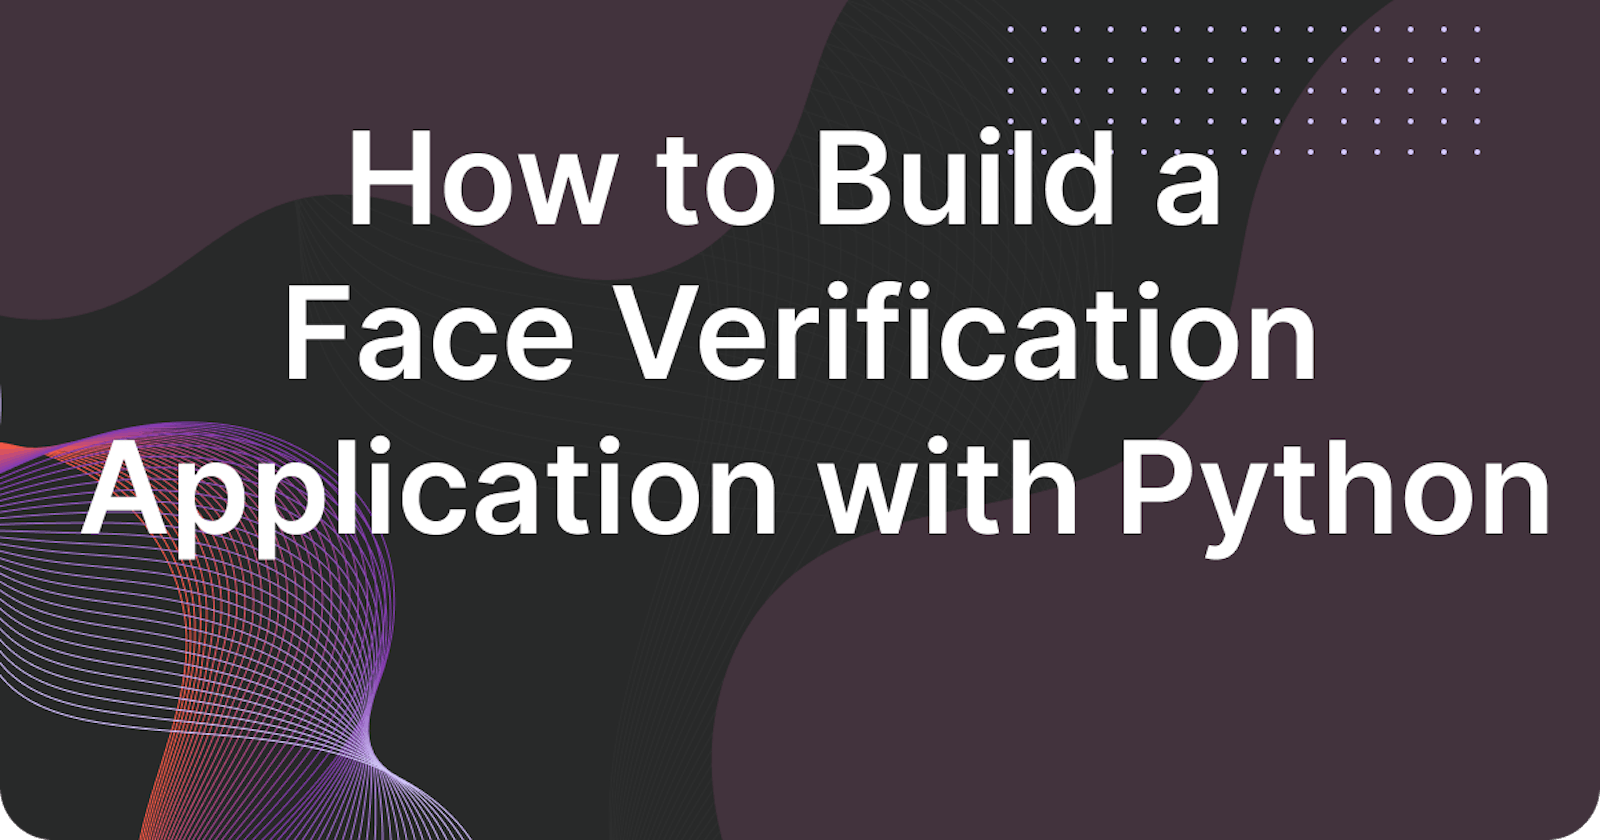 How to Build a Face Verification Application with Python